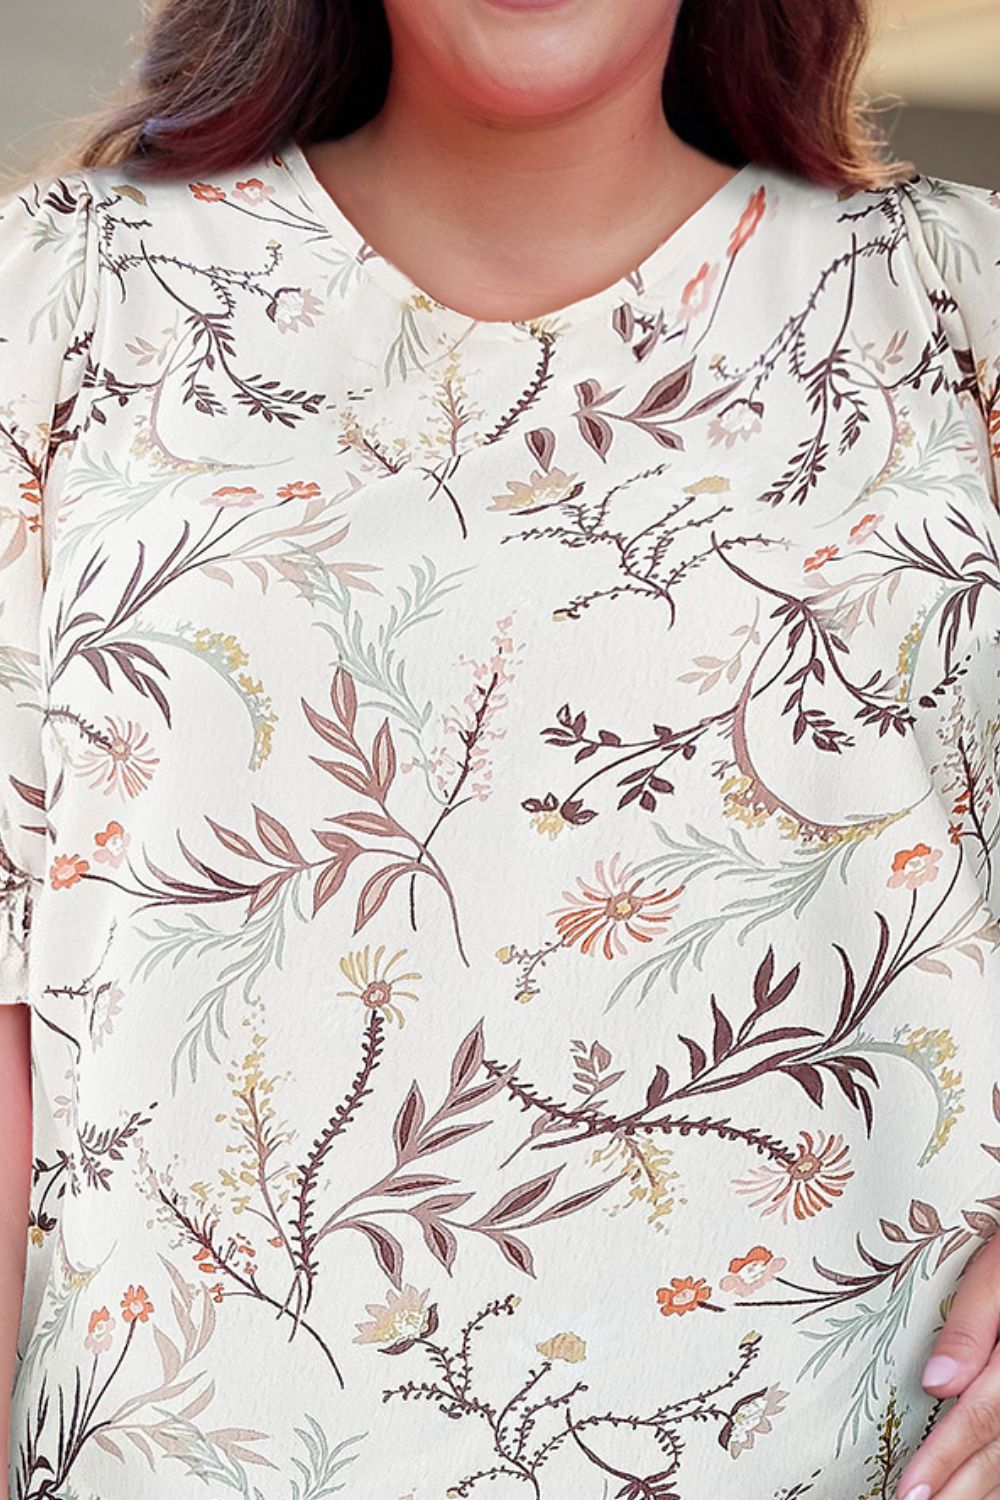 Versatile Plus Size Floral Top in Soft, Breathable Fabric